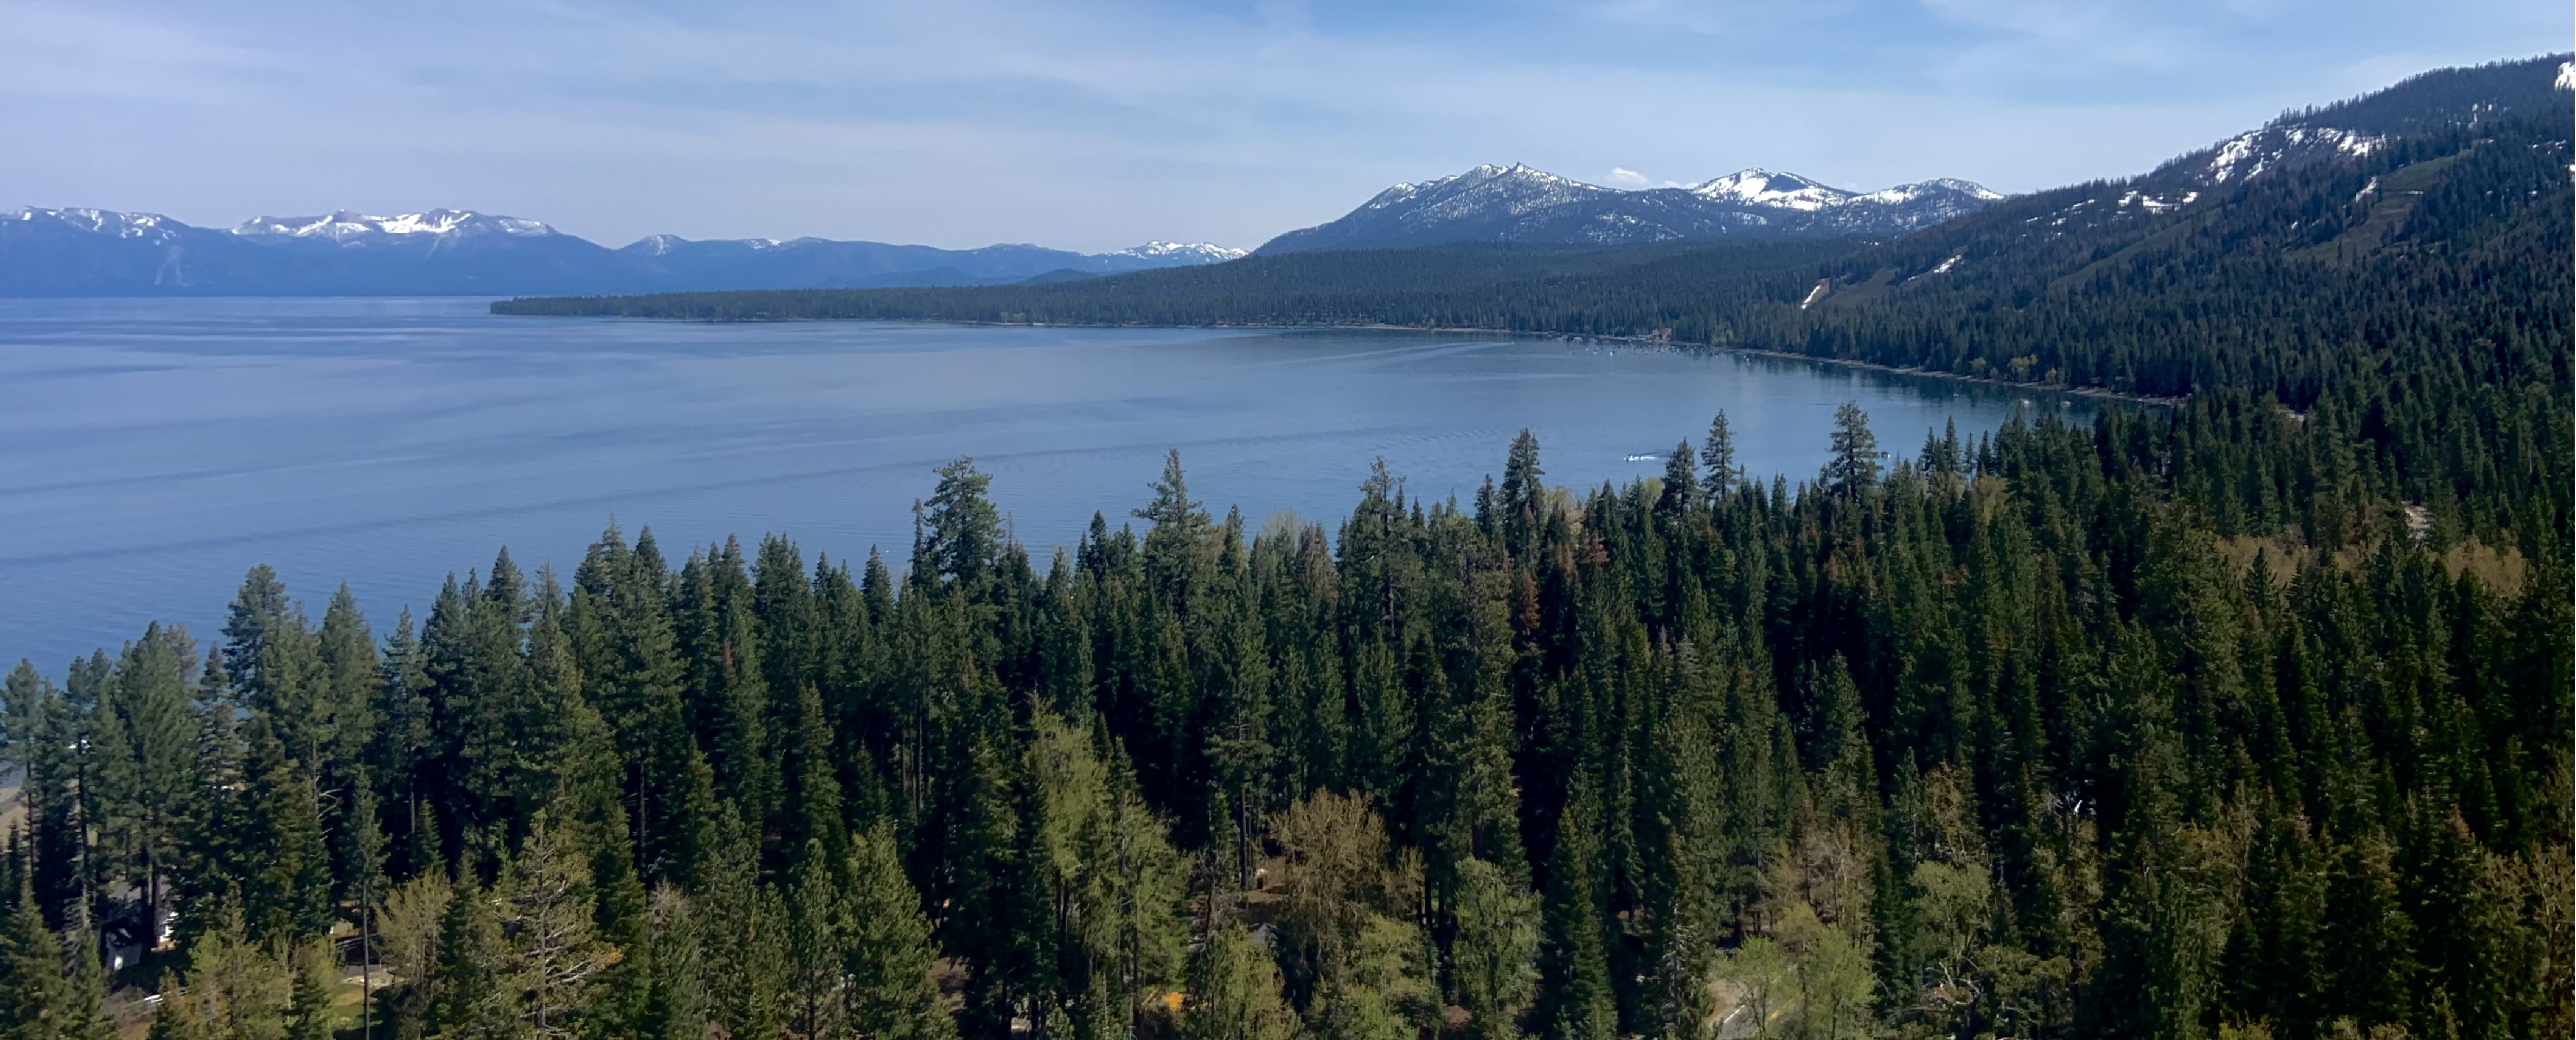 Land Tender Maps Tahoe's Forests to Improve Forest Health